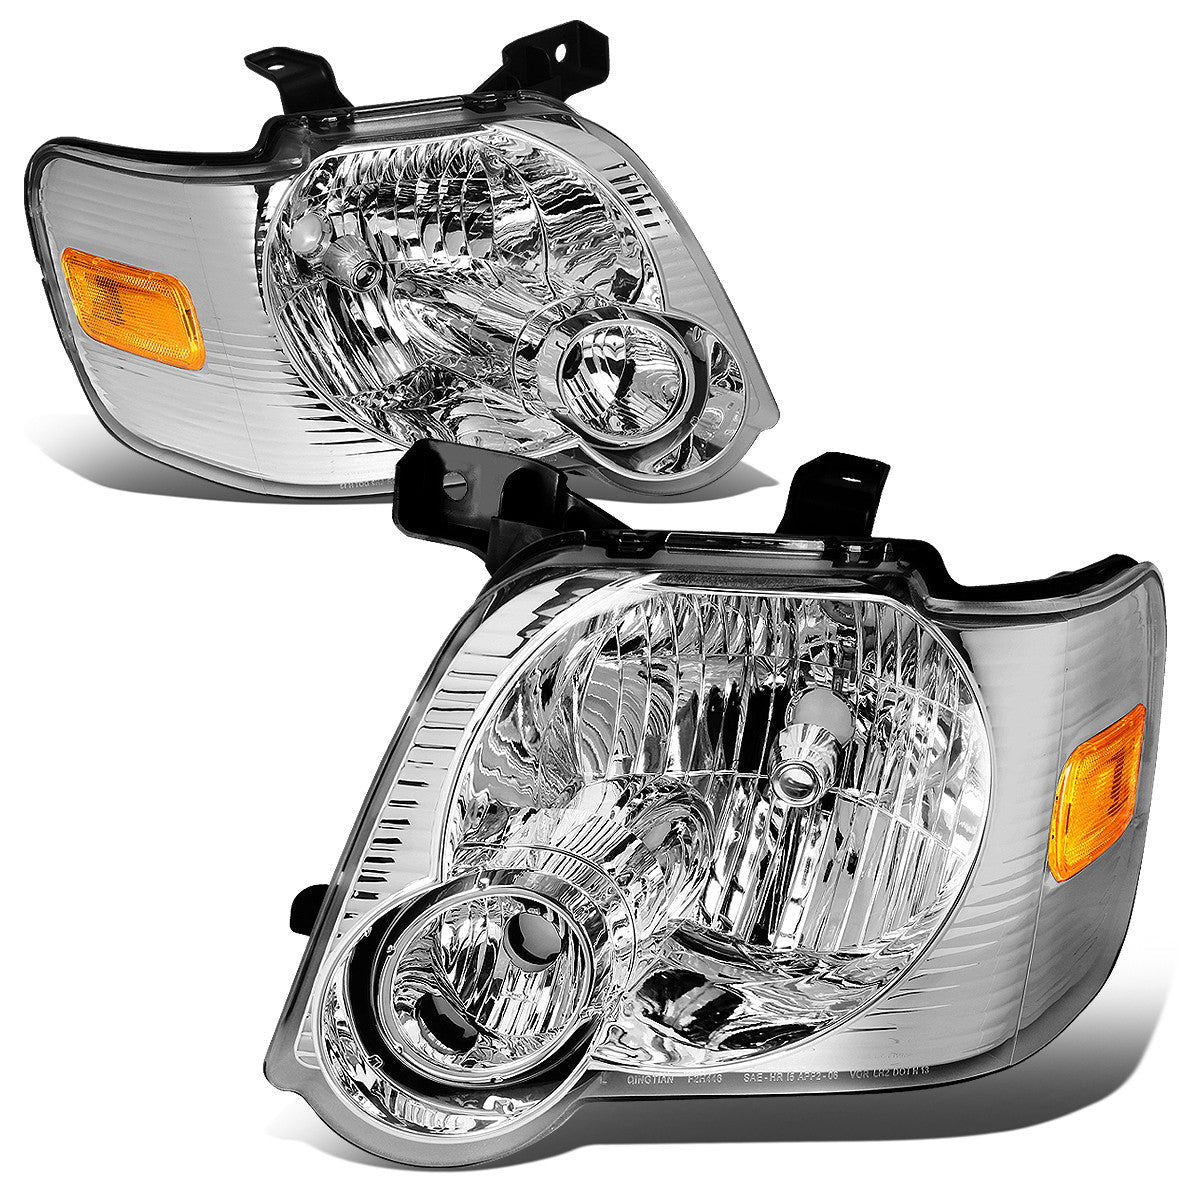 Factory Style Headlights <br>06-10 Ford Explorer, 07-10 Sport Trac